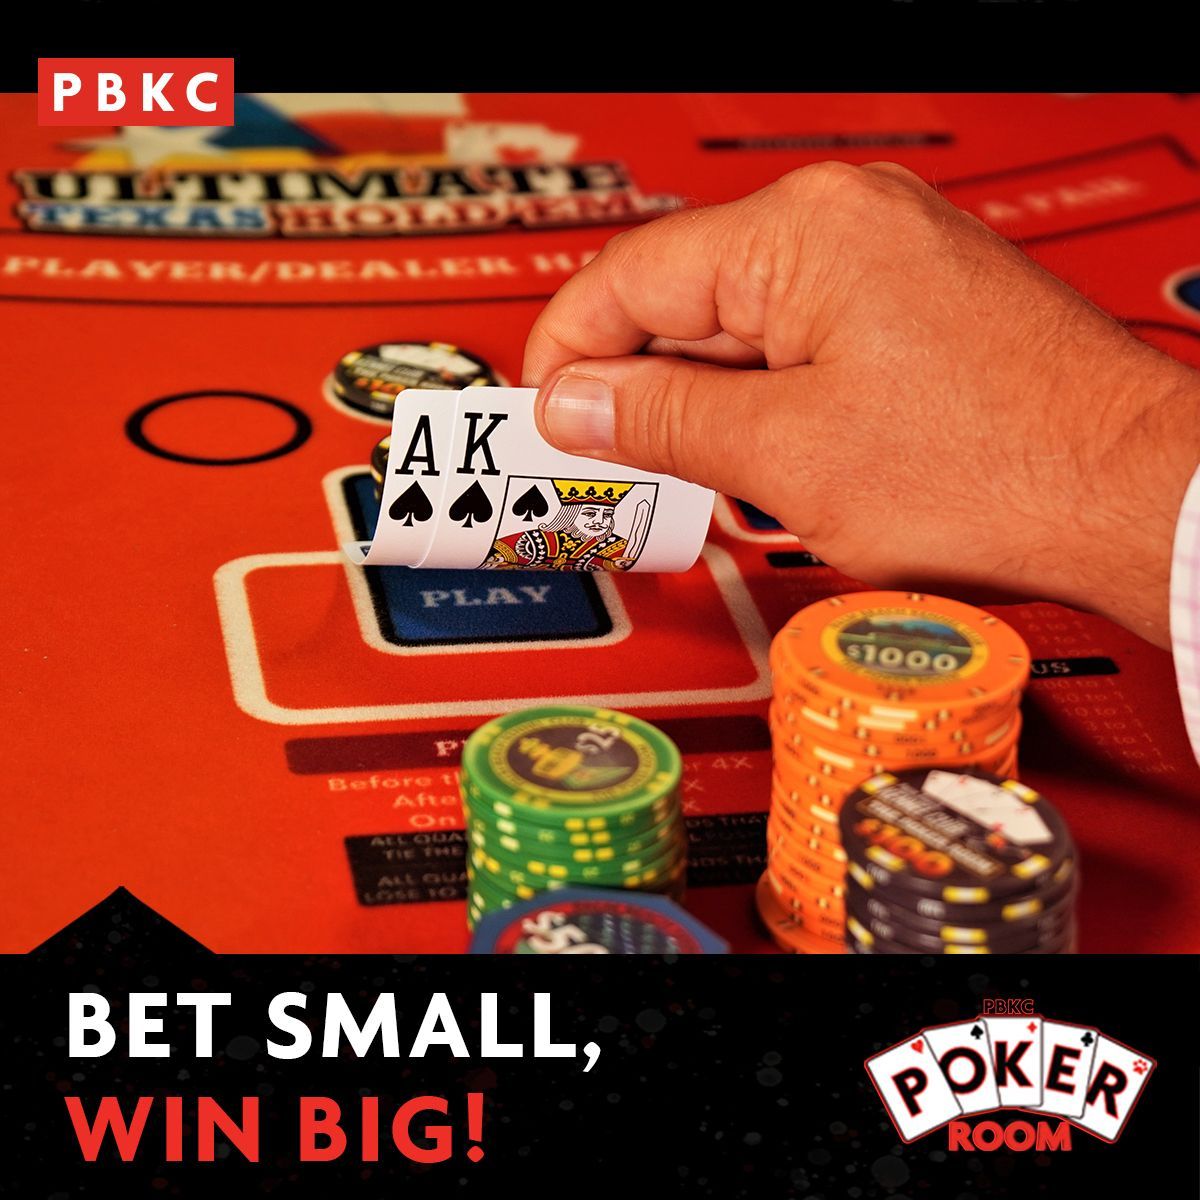 Bet small, win big! Table Games at PBKC! With just a $5 minimum, 7 days a week! #tablegames #3cardpoker #ultimatetexasholdem #poker #westpalmbeach